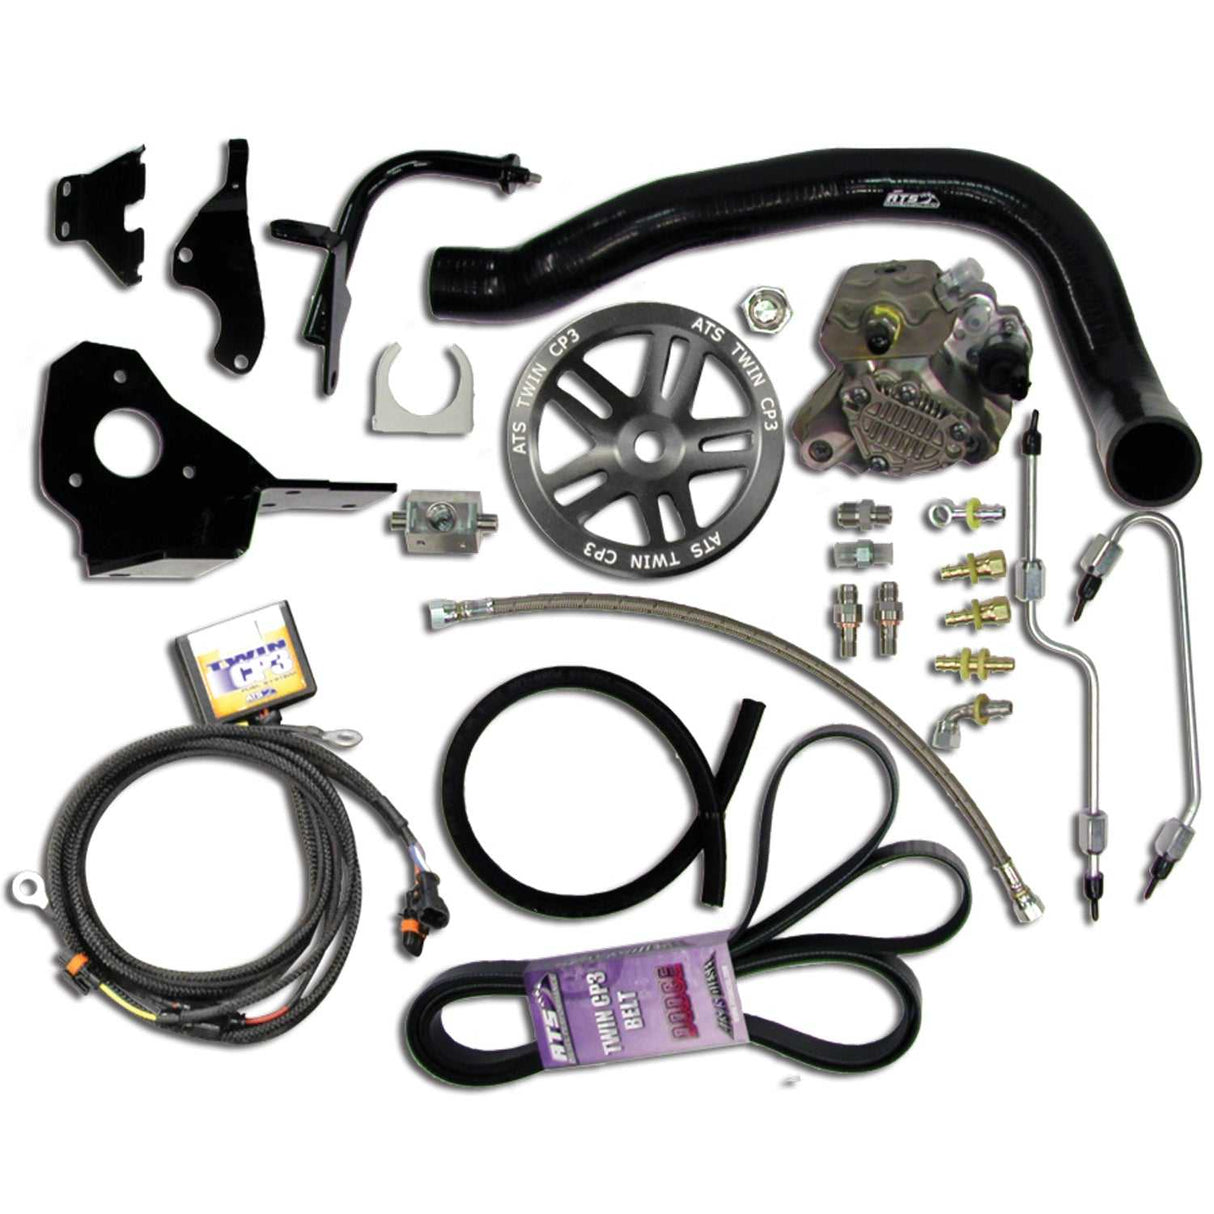 7019002326 ATS Diesel Performance Fuel Injection Pump Upgrade Kit To